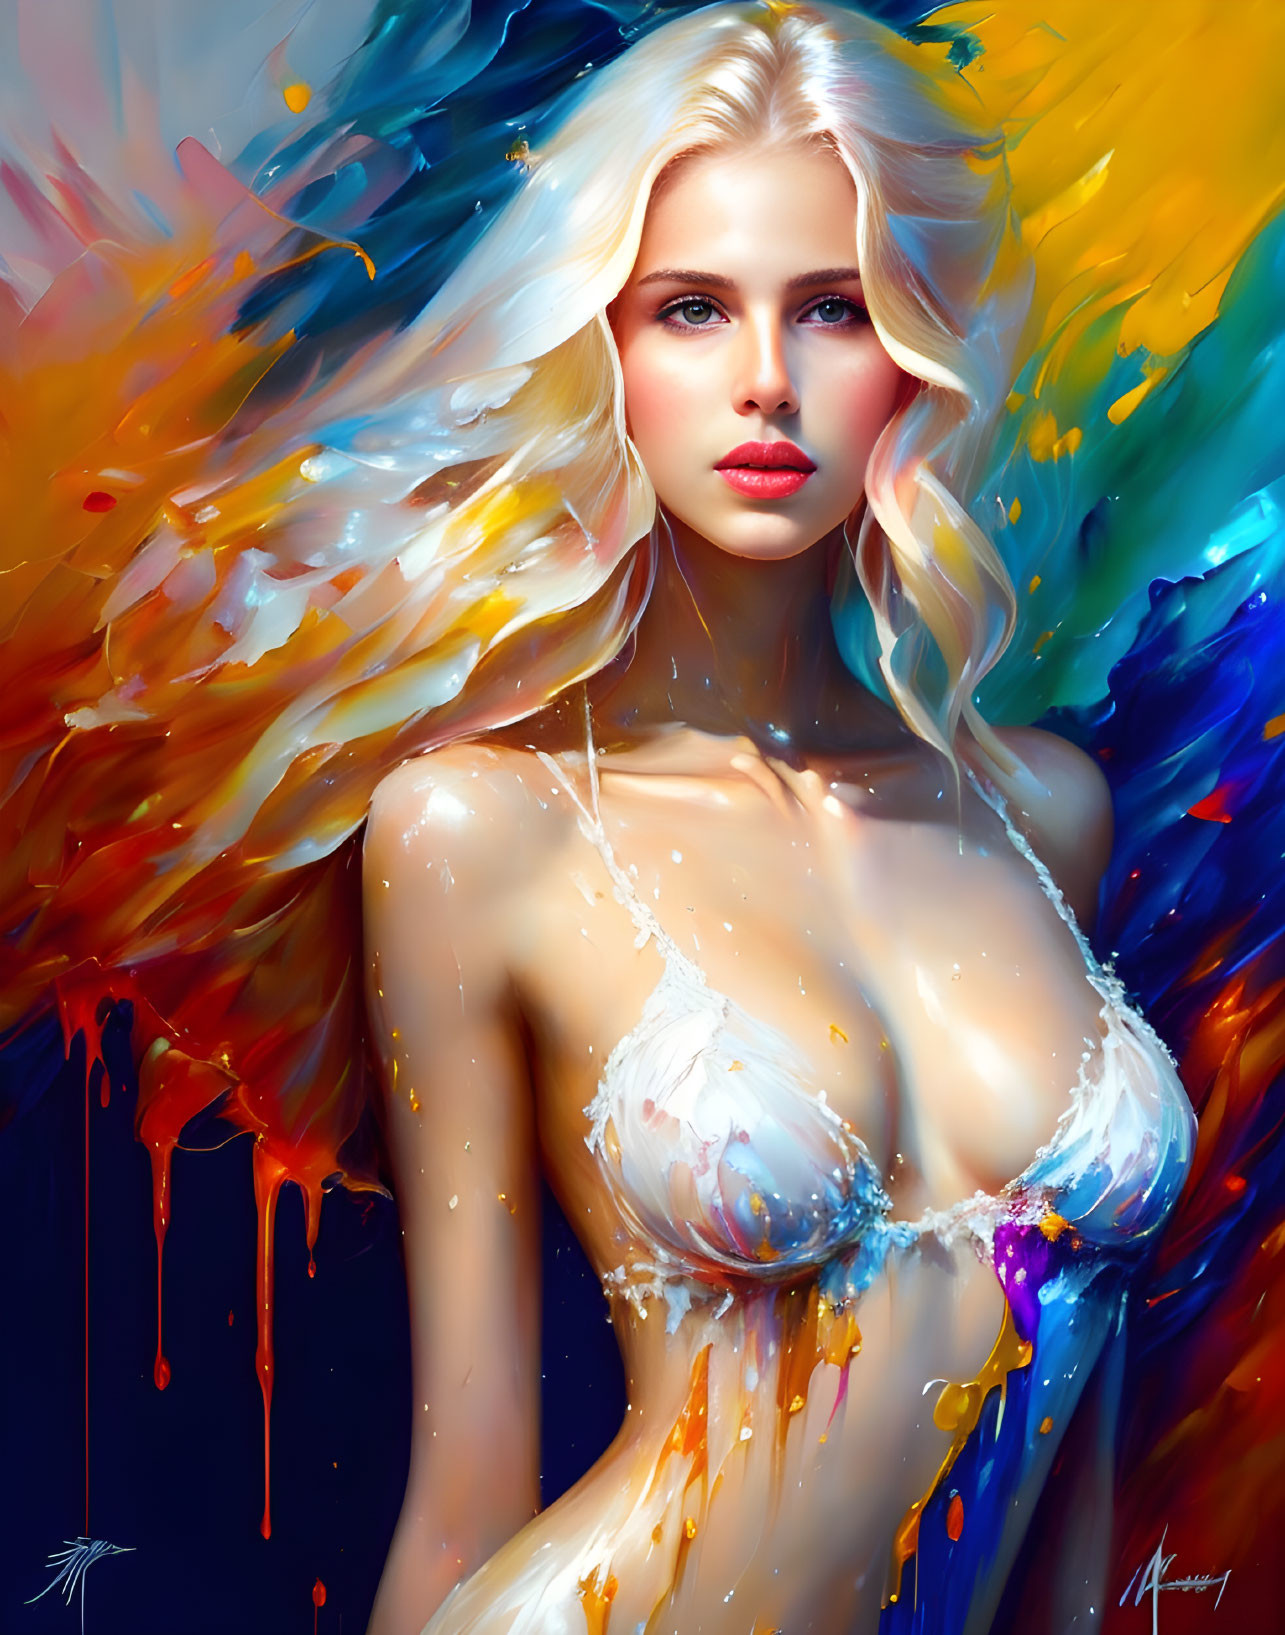 Vibrant digital portrait of a woman with white hair and colorful background